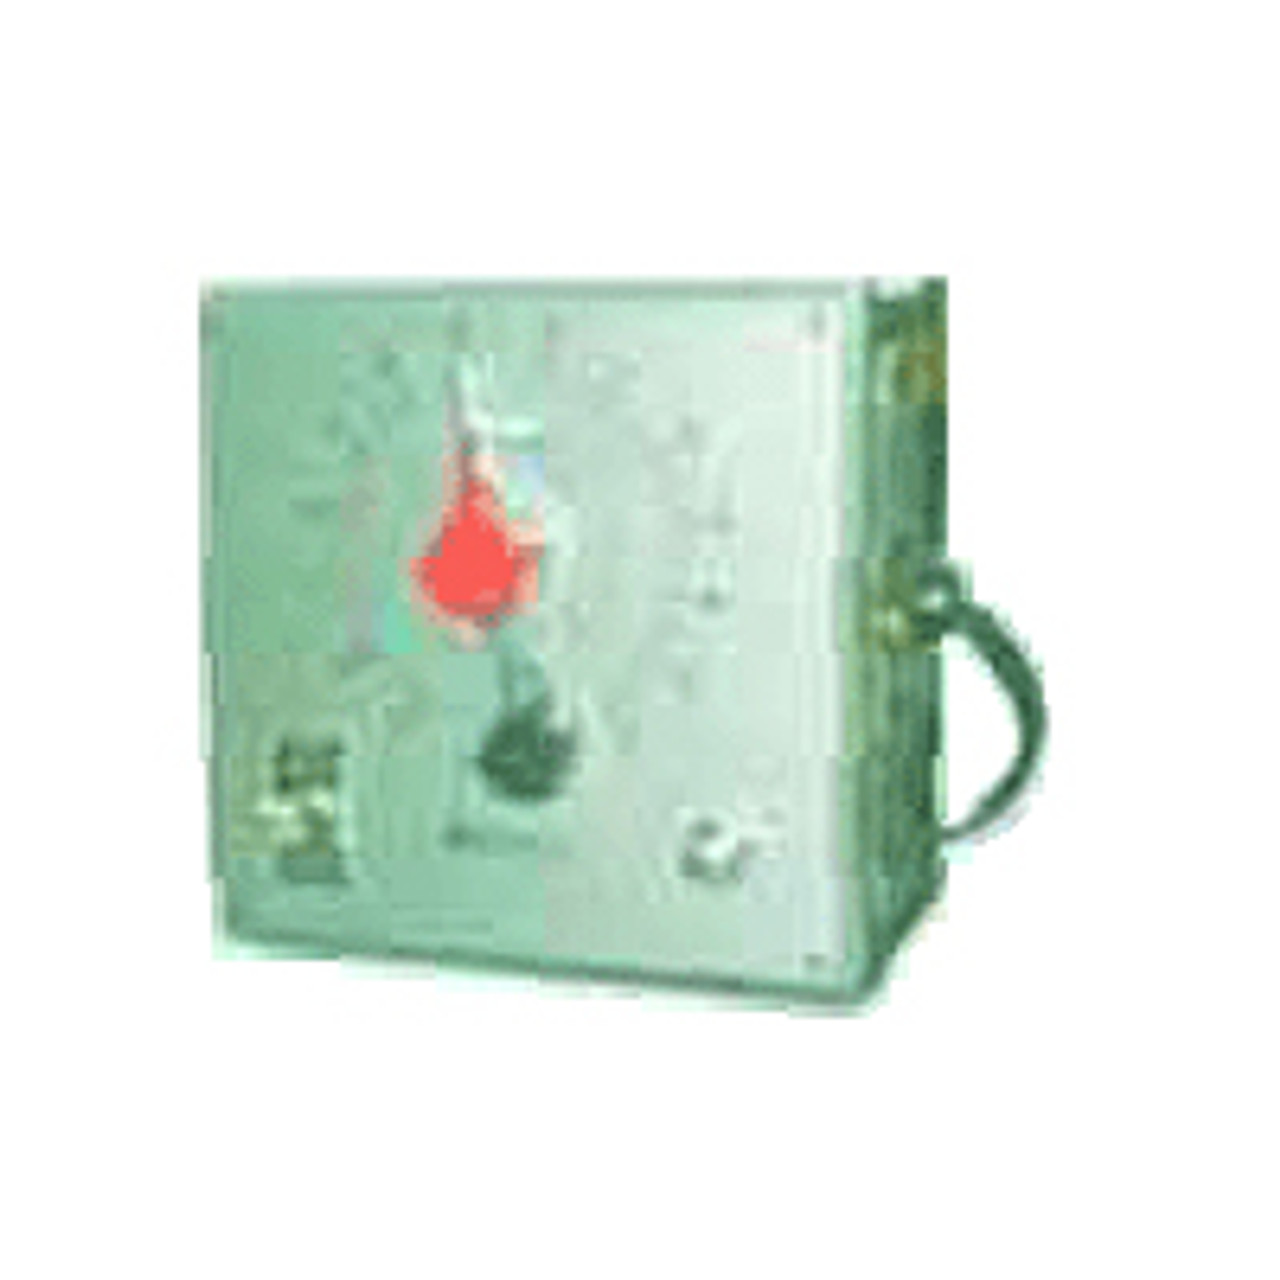 Industrial Timer P-30M-120/60 Interval Timers